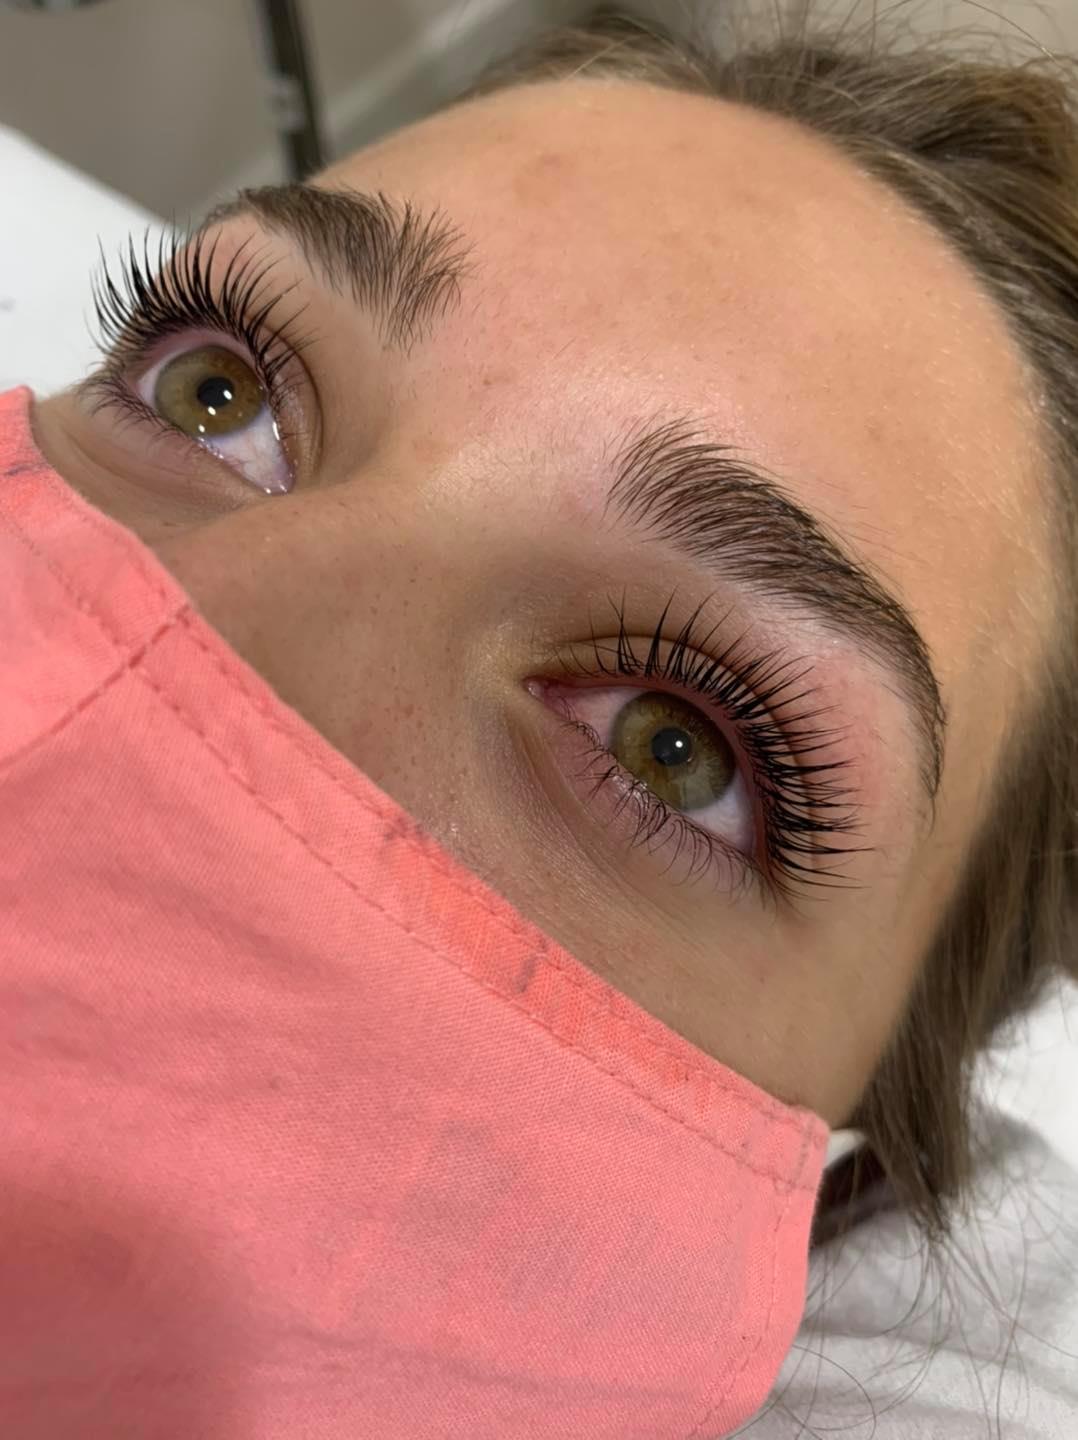 We have a few openings this week for lash lift & tint - make the most of your natural lashes and brighten up your brows